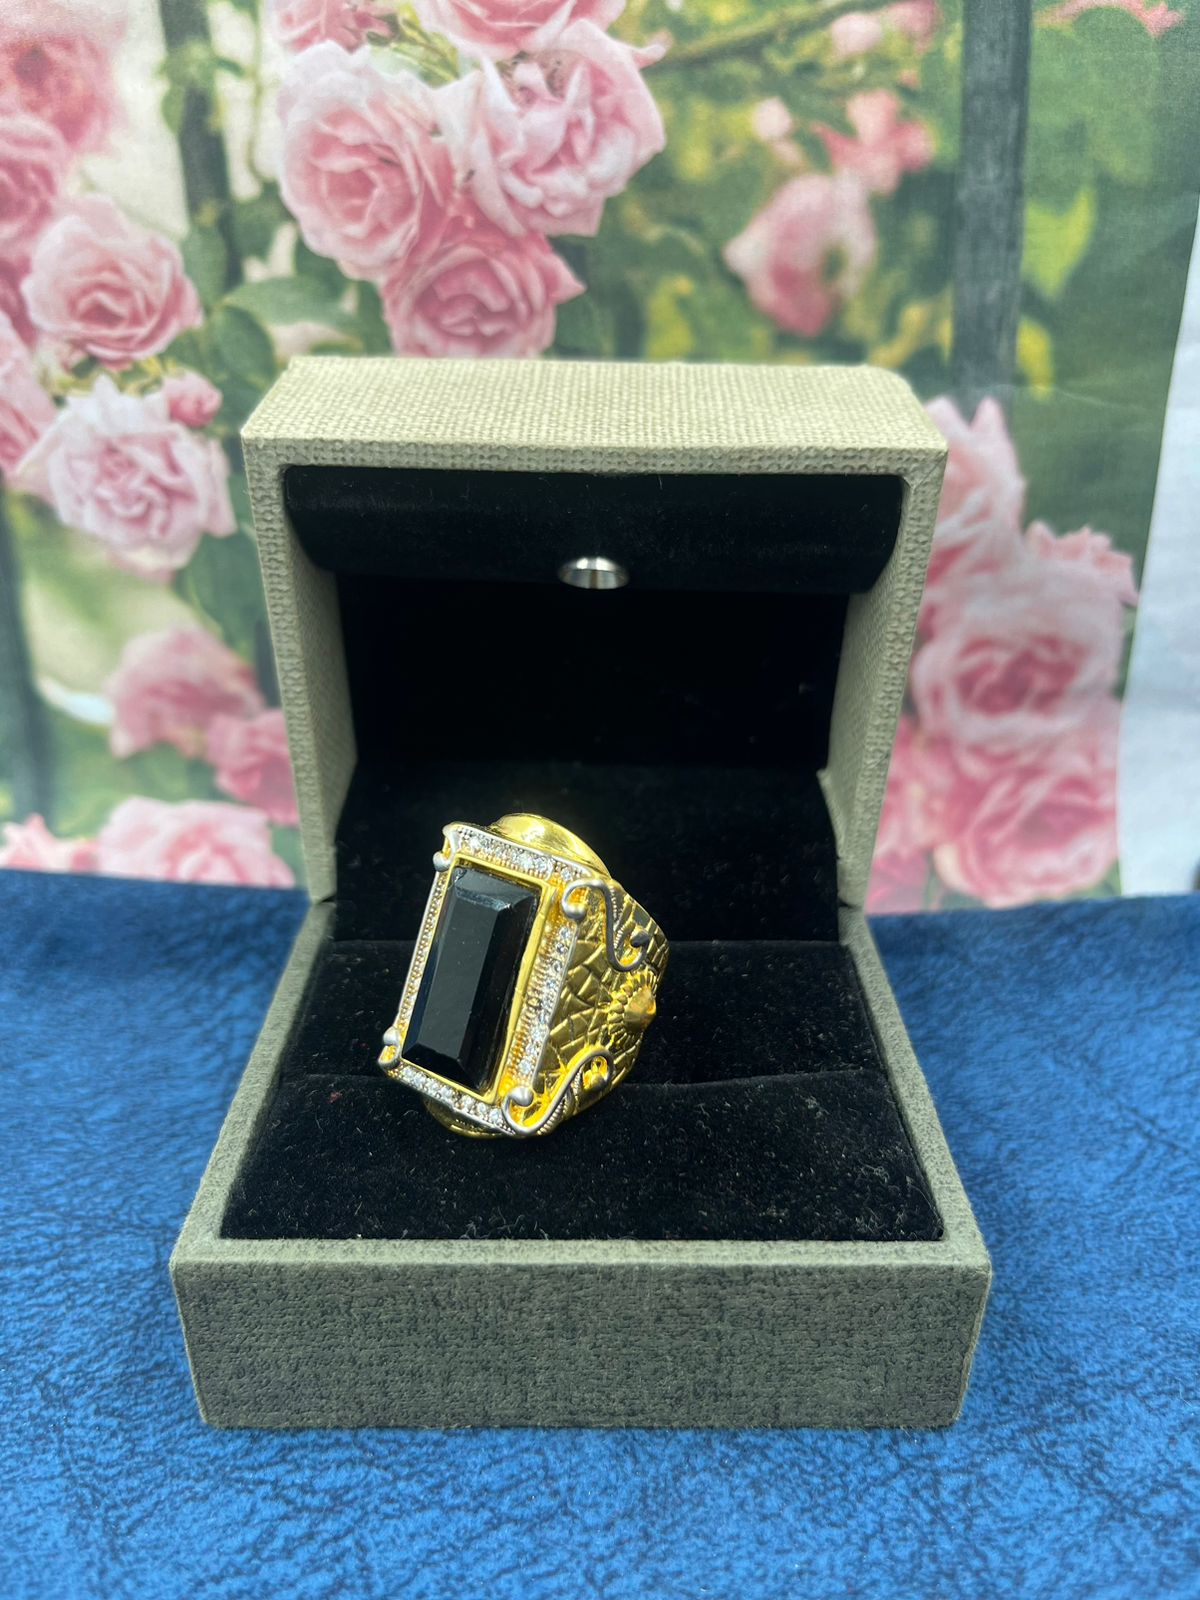 Candere by Kalyan Jewellers Diamond Ring 14kt Diamond, Onyx Yellow Gold ring  Price in India - Buy Candere by Kalyan Jewellers Diamond Ring 14kt Diamond,  Onyx Yellow Gold ring online at Flipkart.com